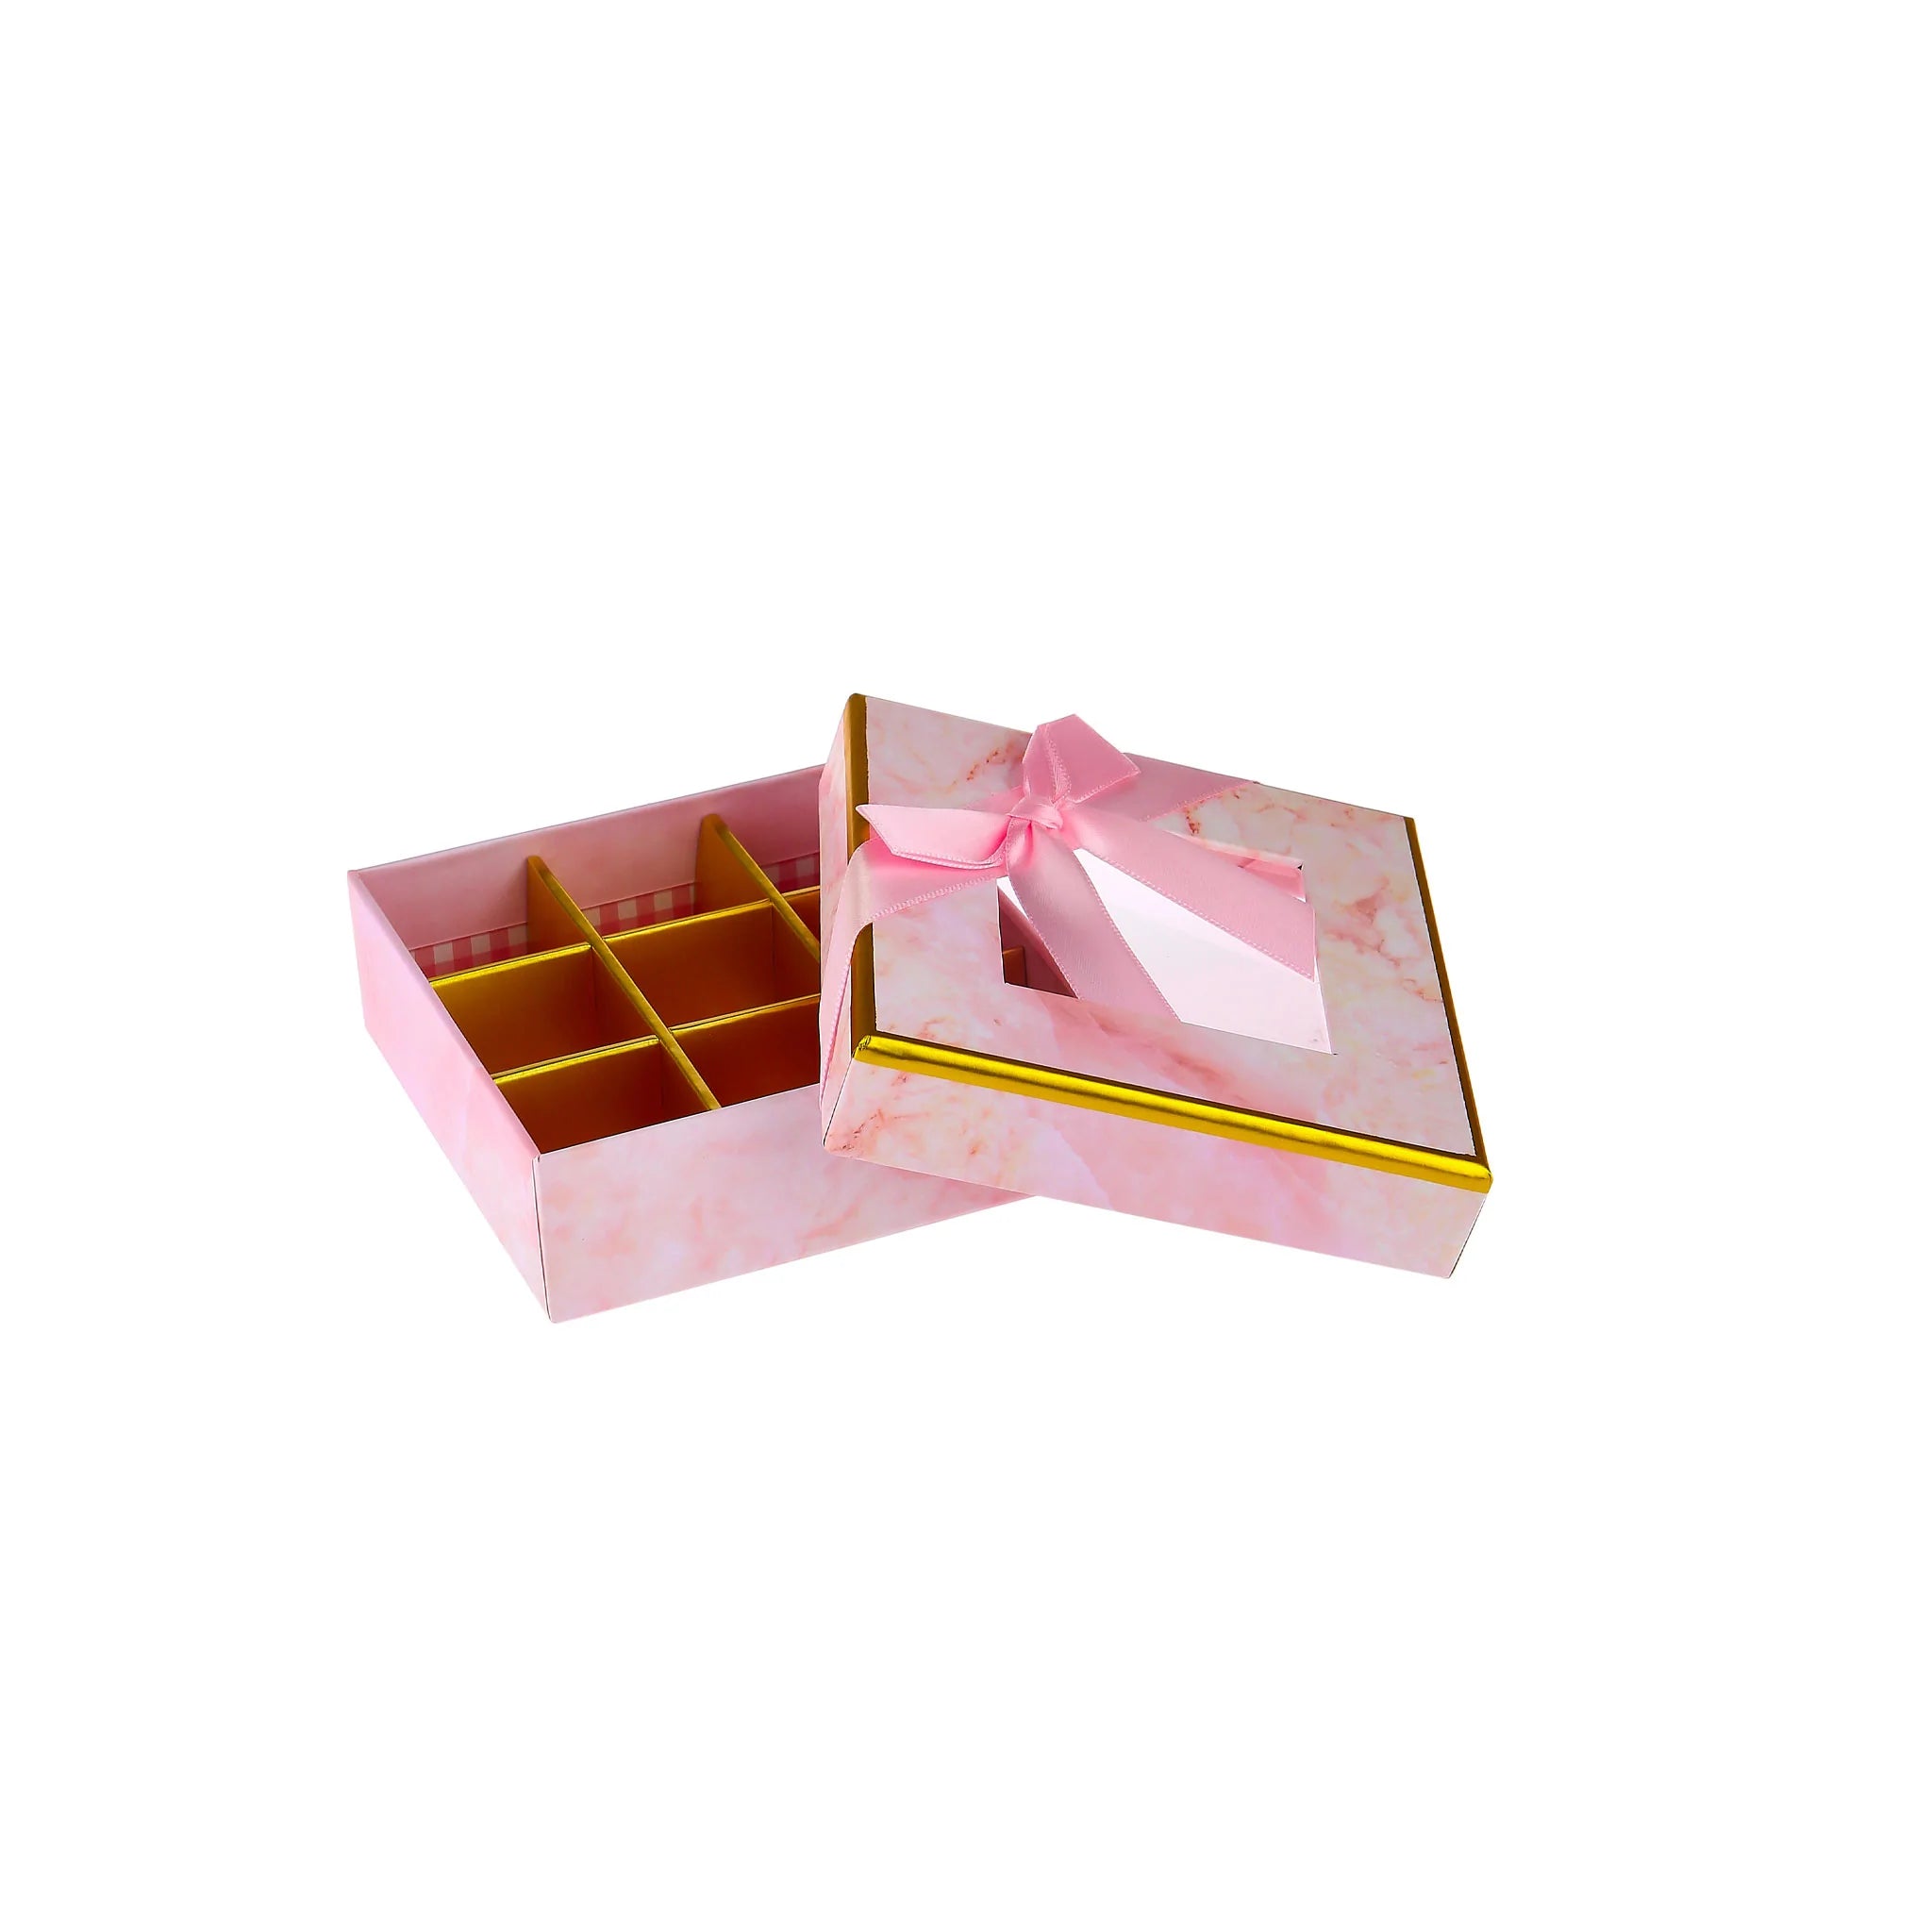 48 Pieces Square Pink Chocolate Gift Box Shape 09 Division - 12*12*4 cm